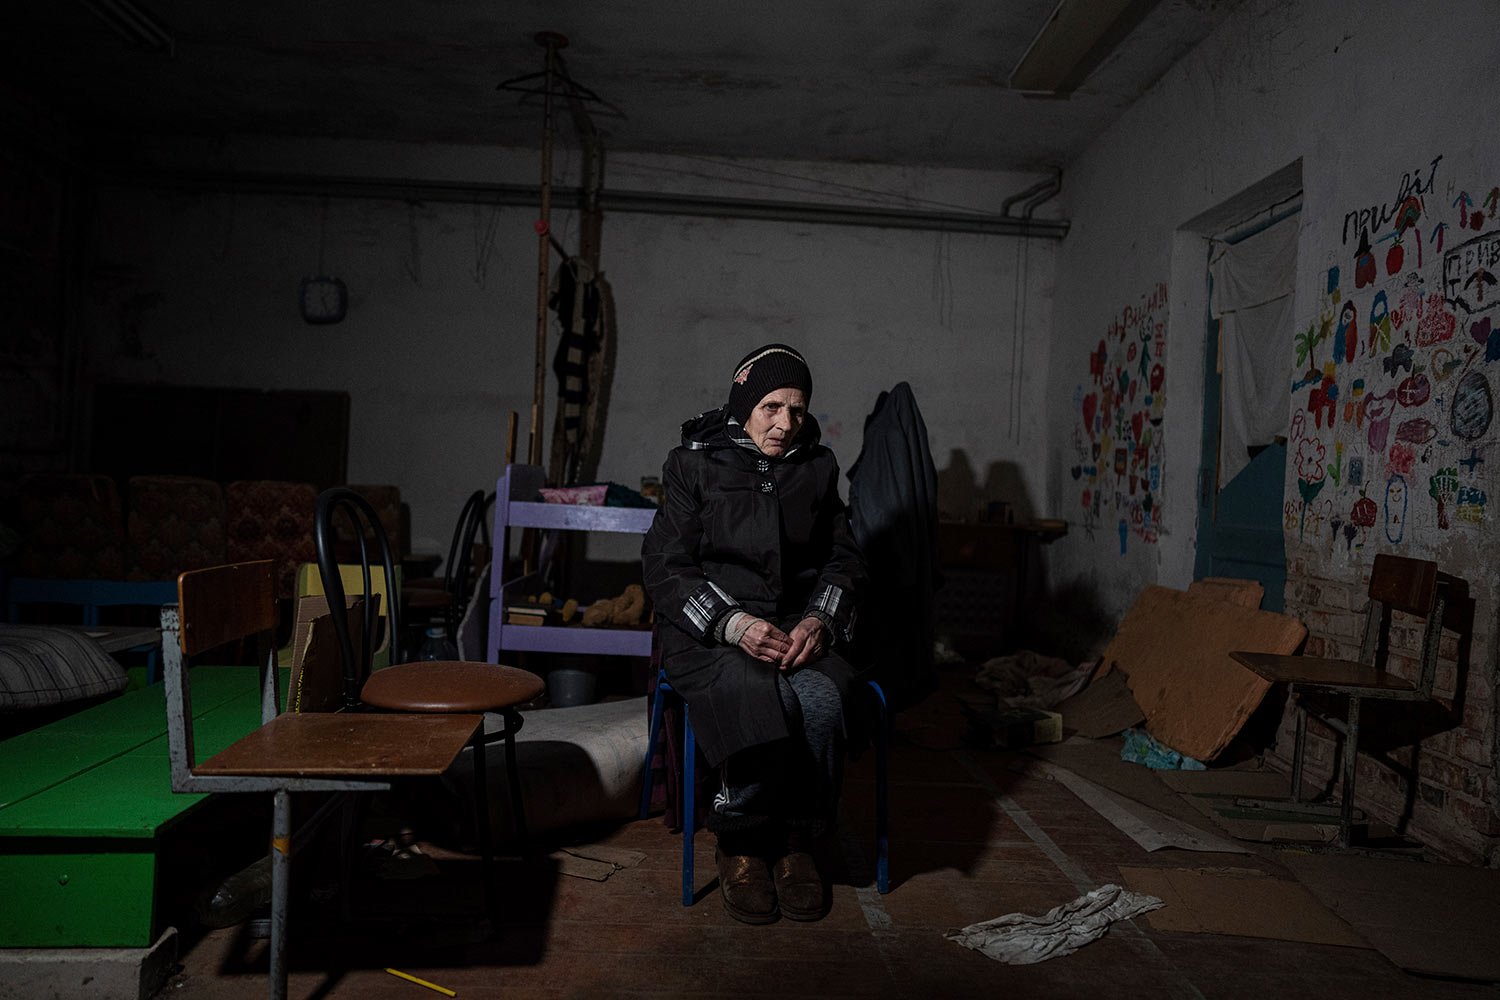  Valentina Saroyan sits in the basement of a school in Yahidne, near Chernihiv, Ukraine, Tuesday, April 12, 2022. Residents say more than 300 people were trapped for weeks by Russian occupiers in the basement of the school in Yahidne.  (AP Photo/Evge